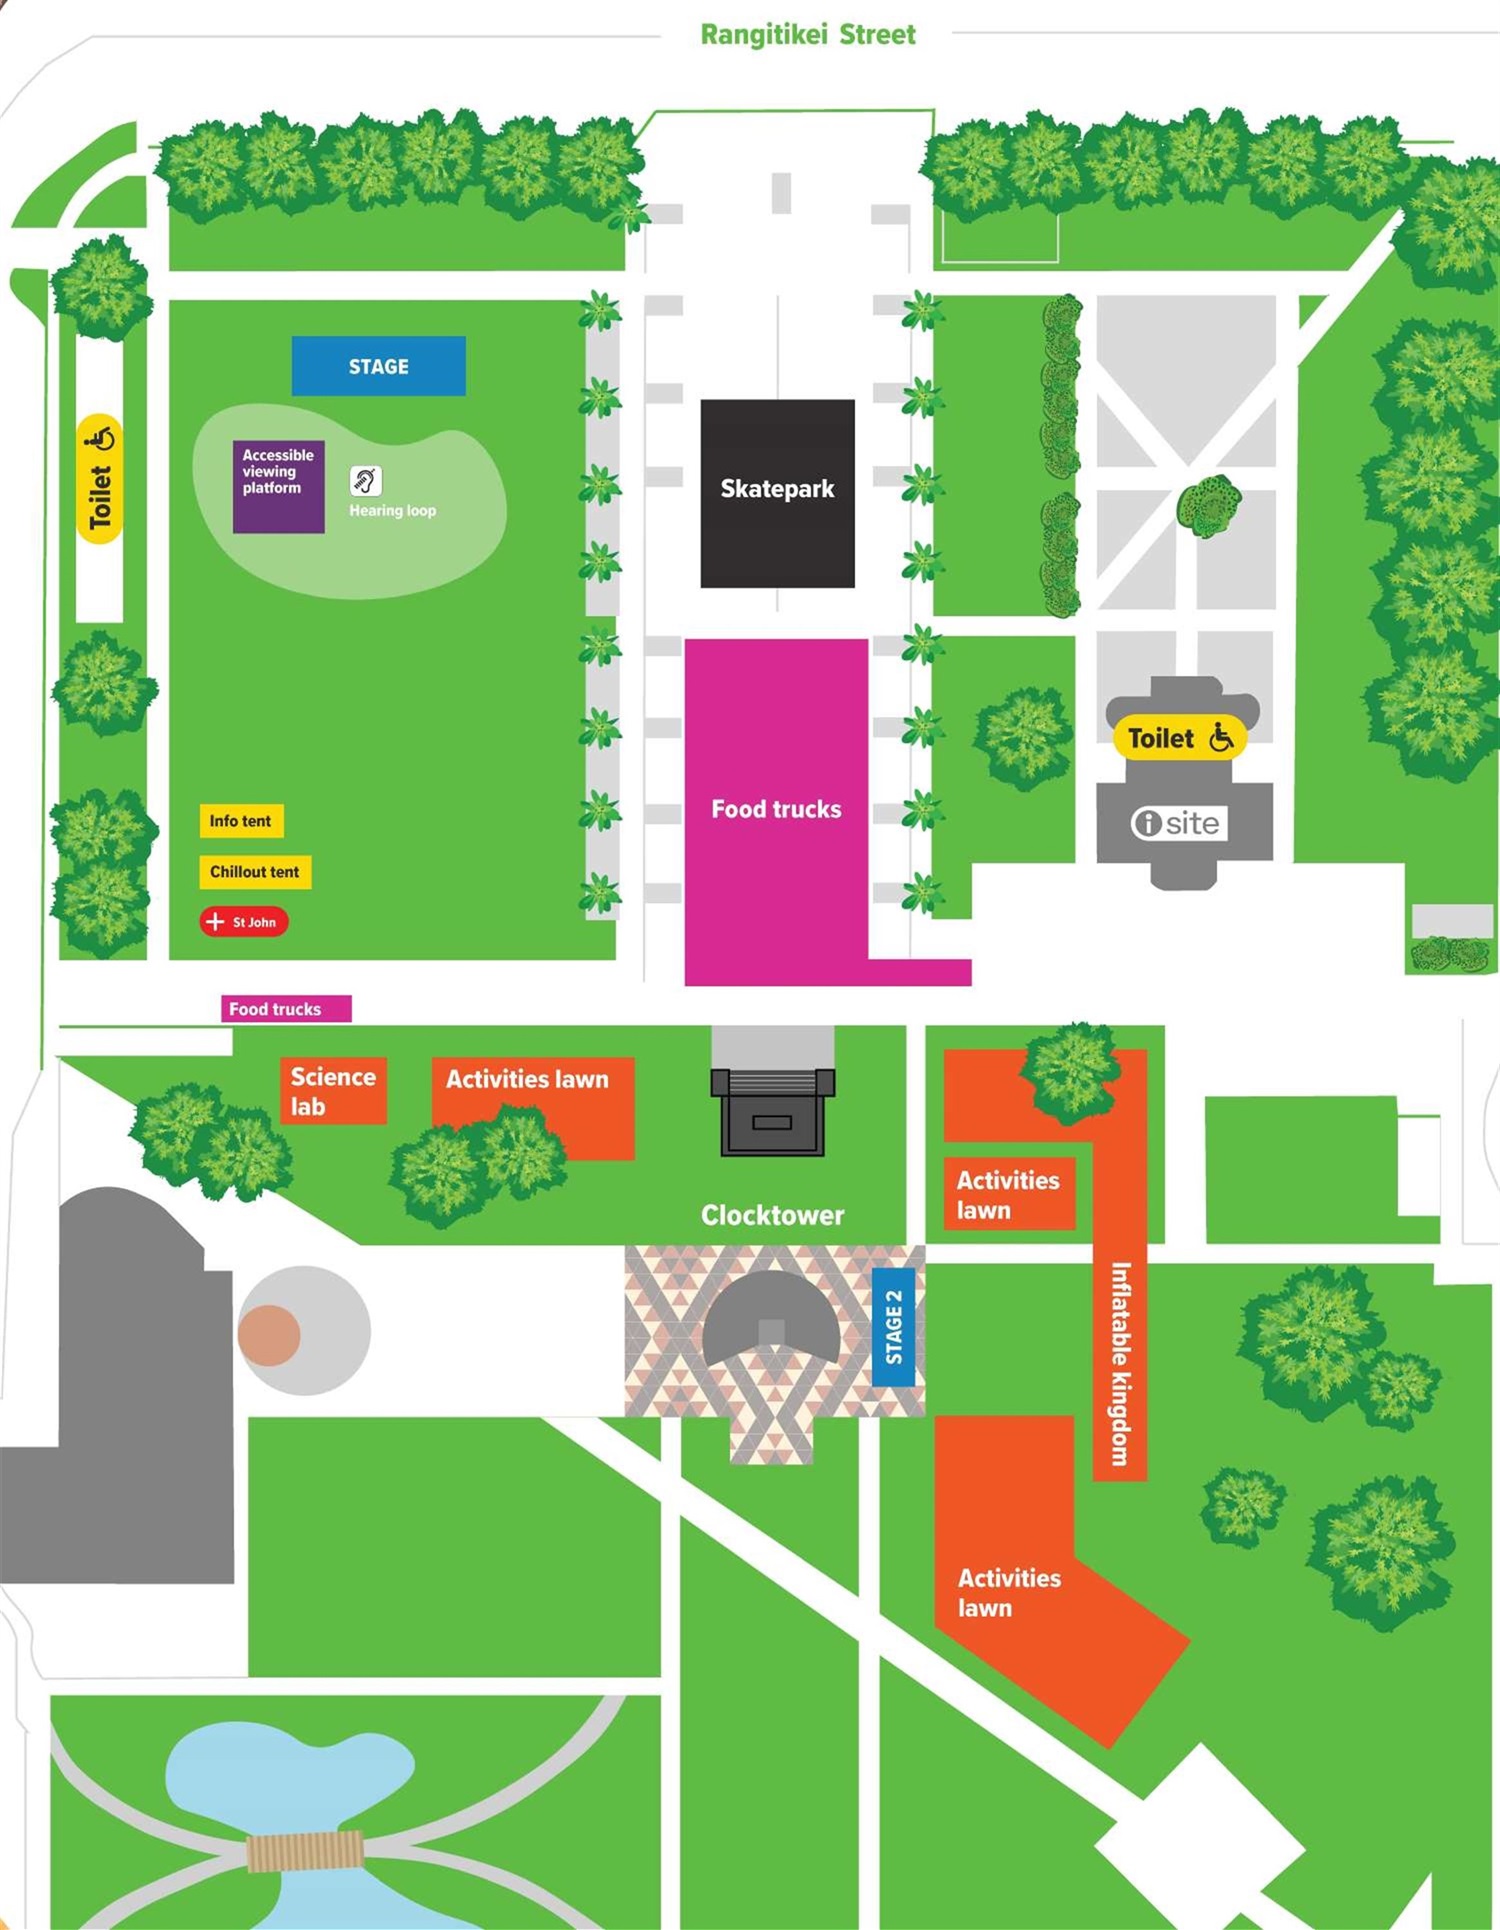 Sitemap for event in the Square, showing the location of the stage, toilets, accessible viewing platform, food trucks and so on.